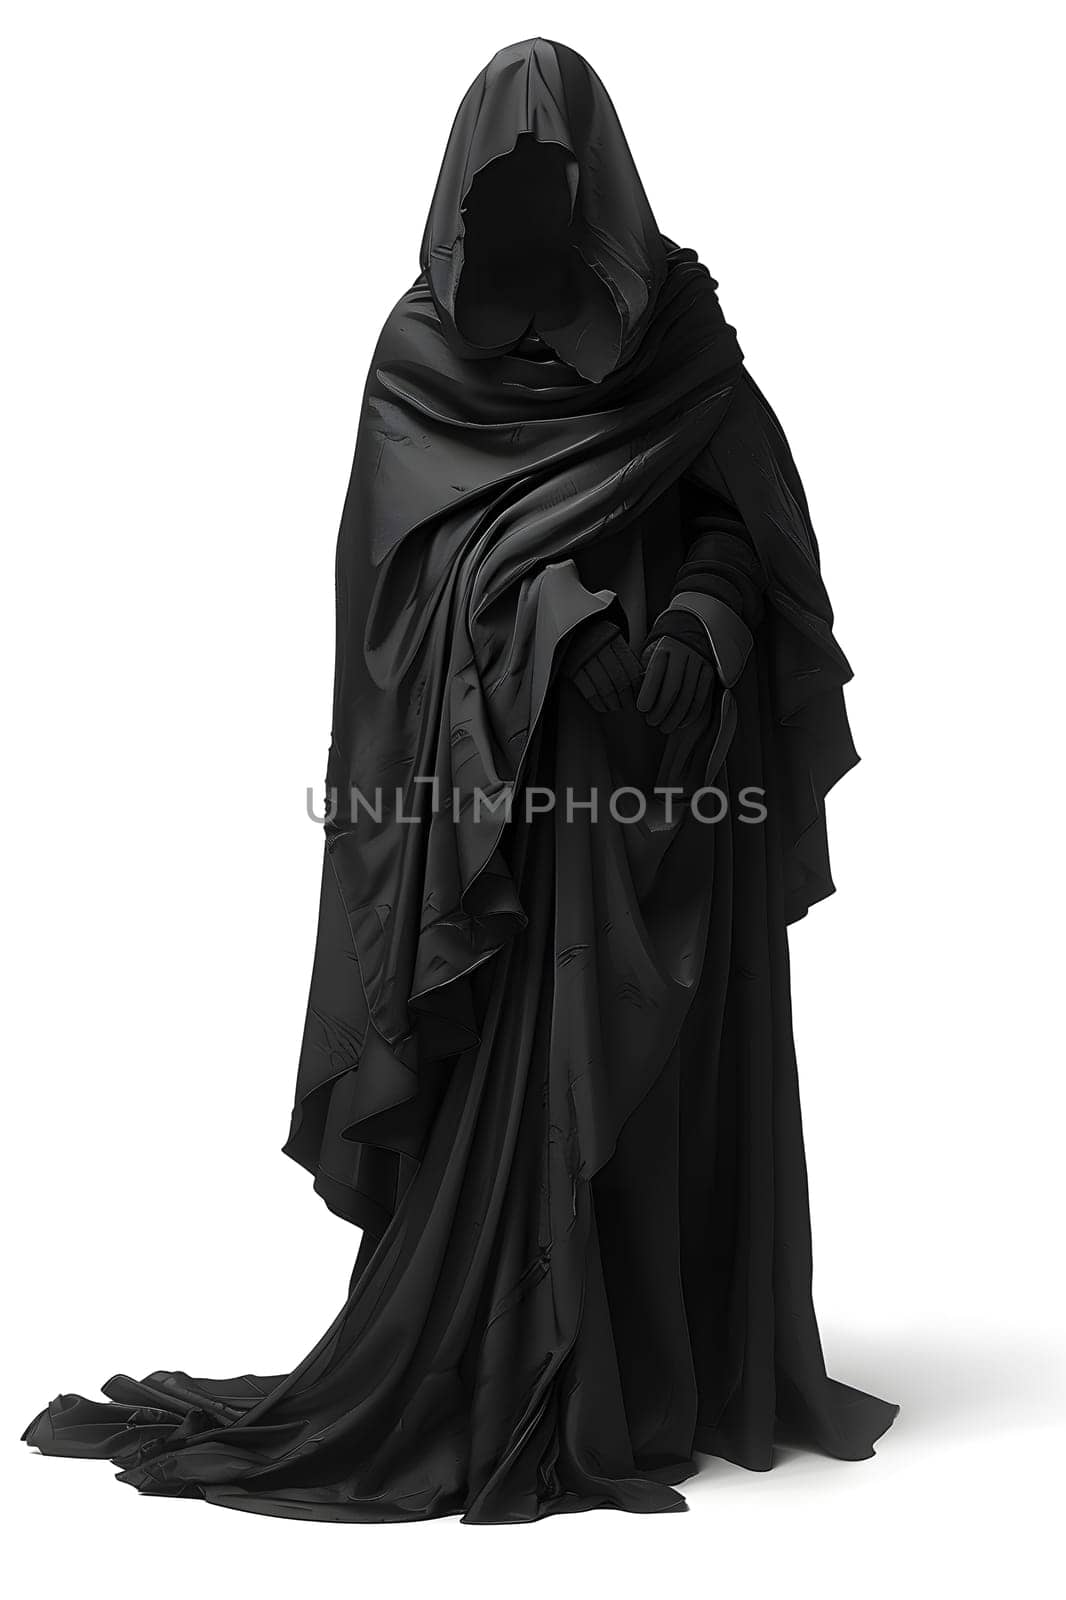 The fictional character of the Grim Reaper is depicted wearing a long black cloak with a hood, resembling a sculpture in formal wear and outerwear art